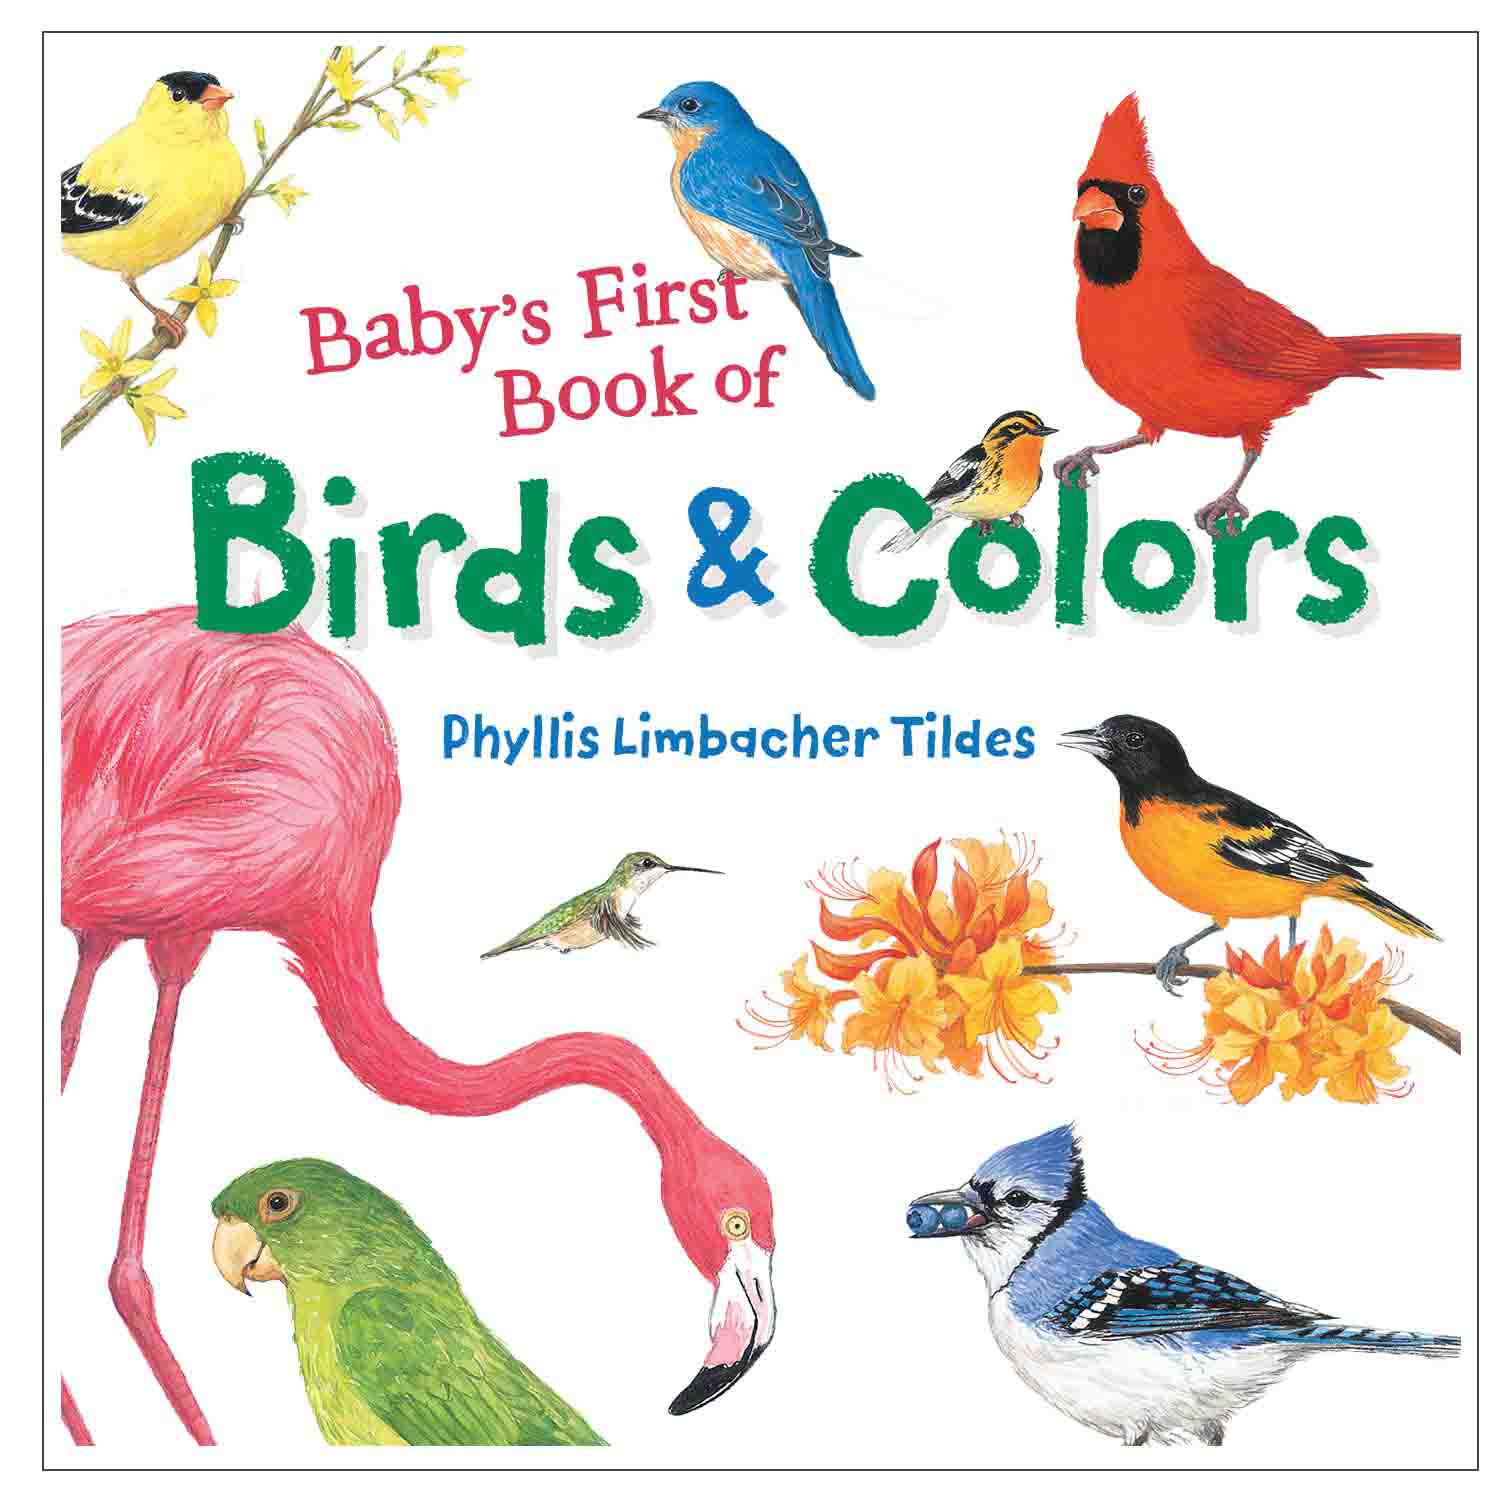 Baby's First Book of Birds & Colors